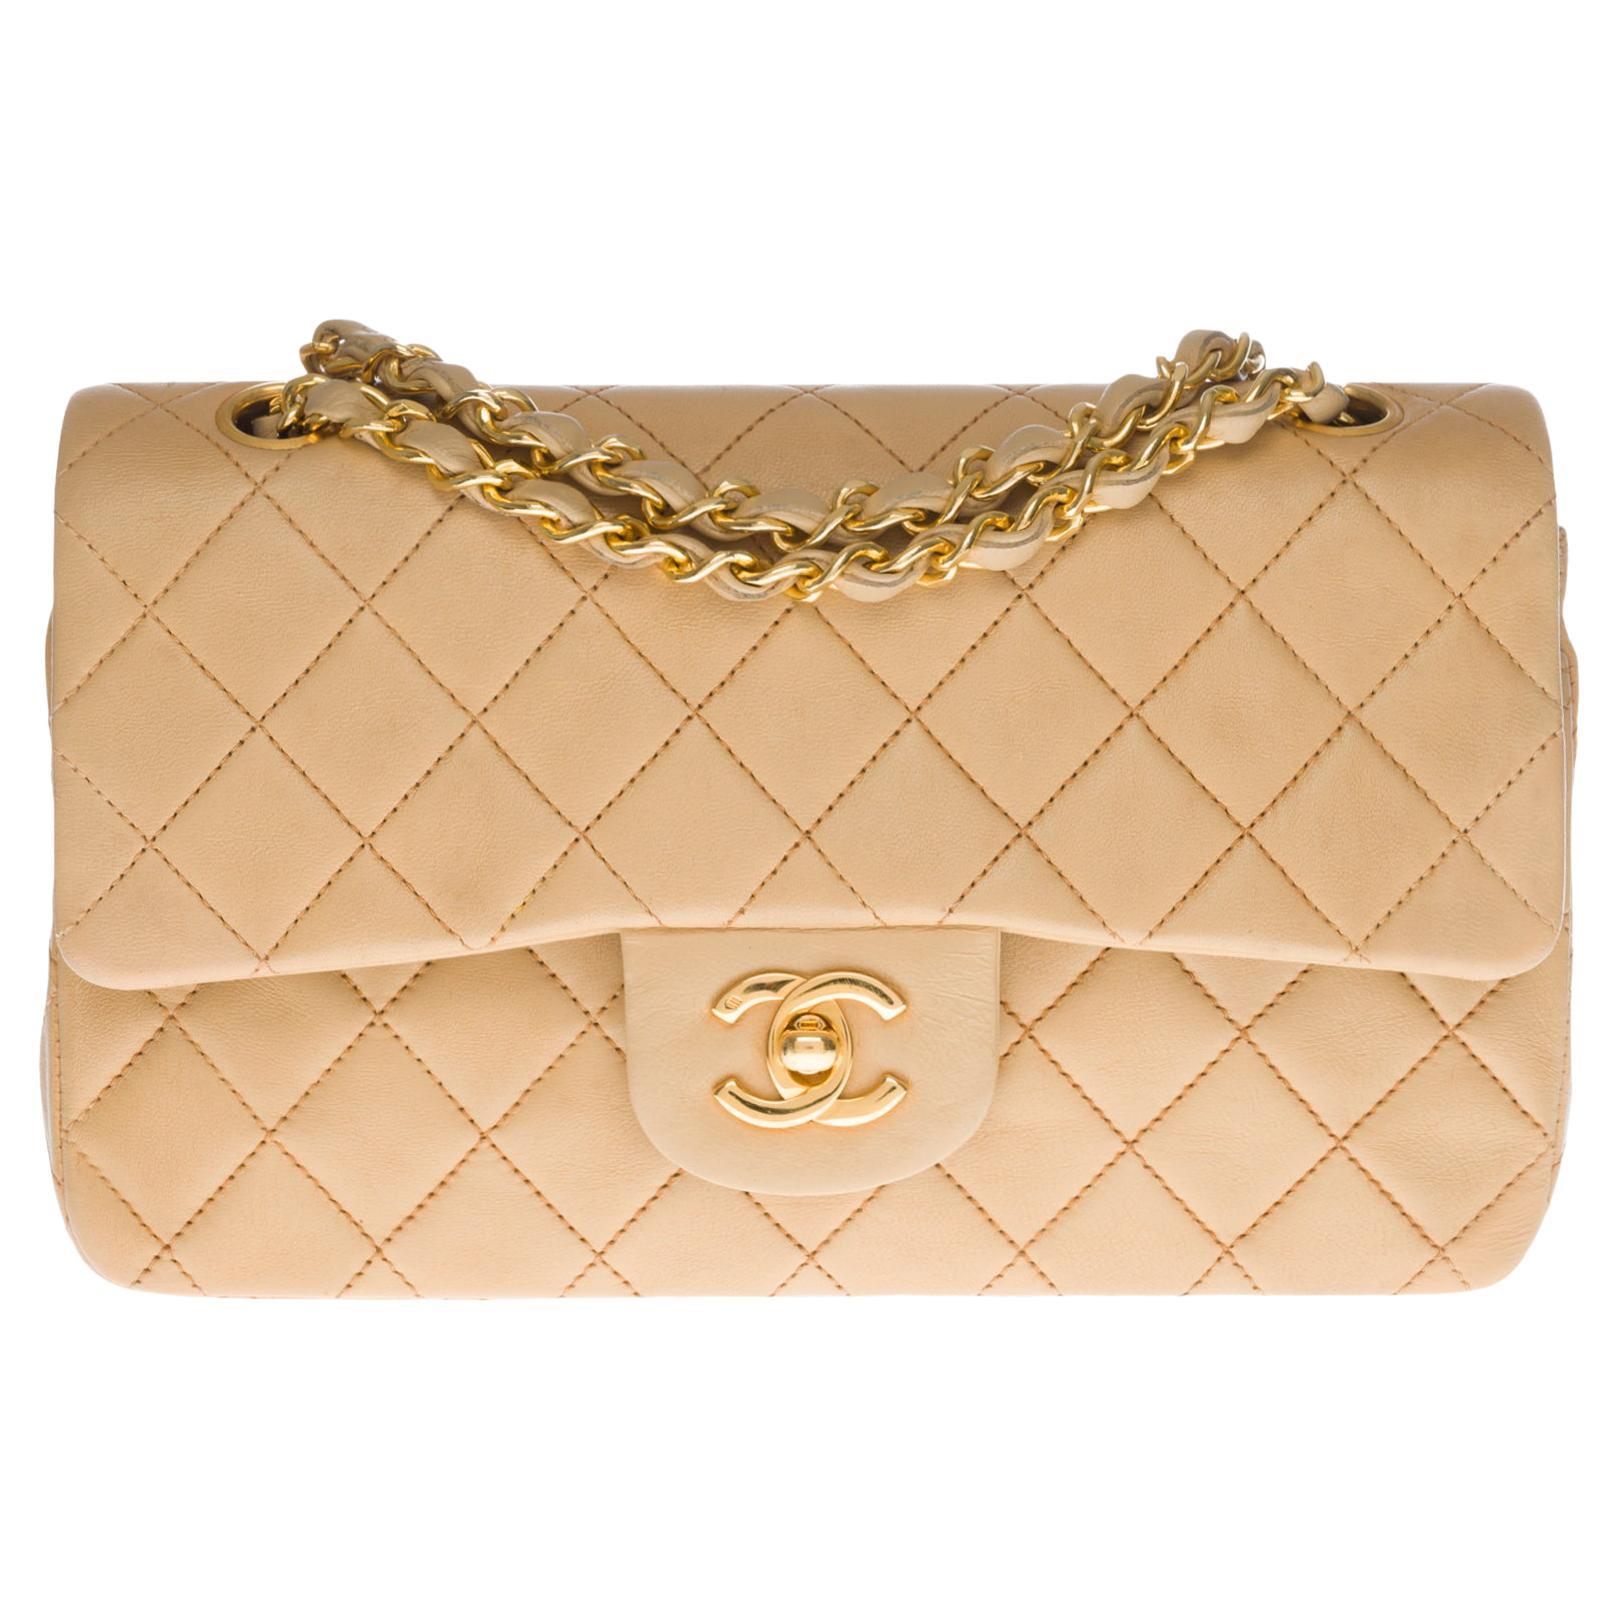 Chanel Timeless 23cm double flap Shoulder bag in Beige quilted lambskin, GHW